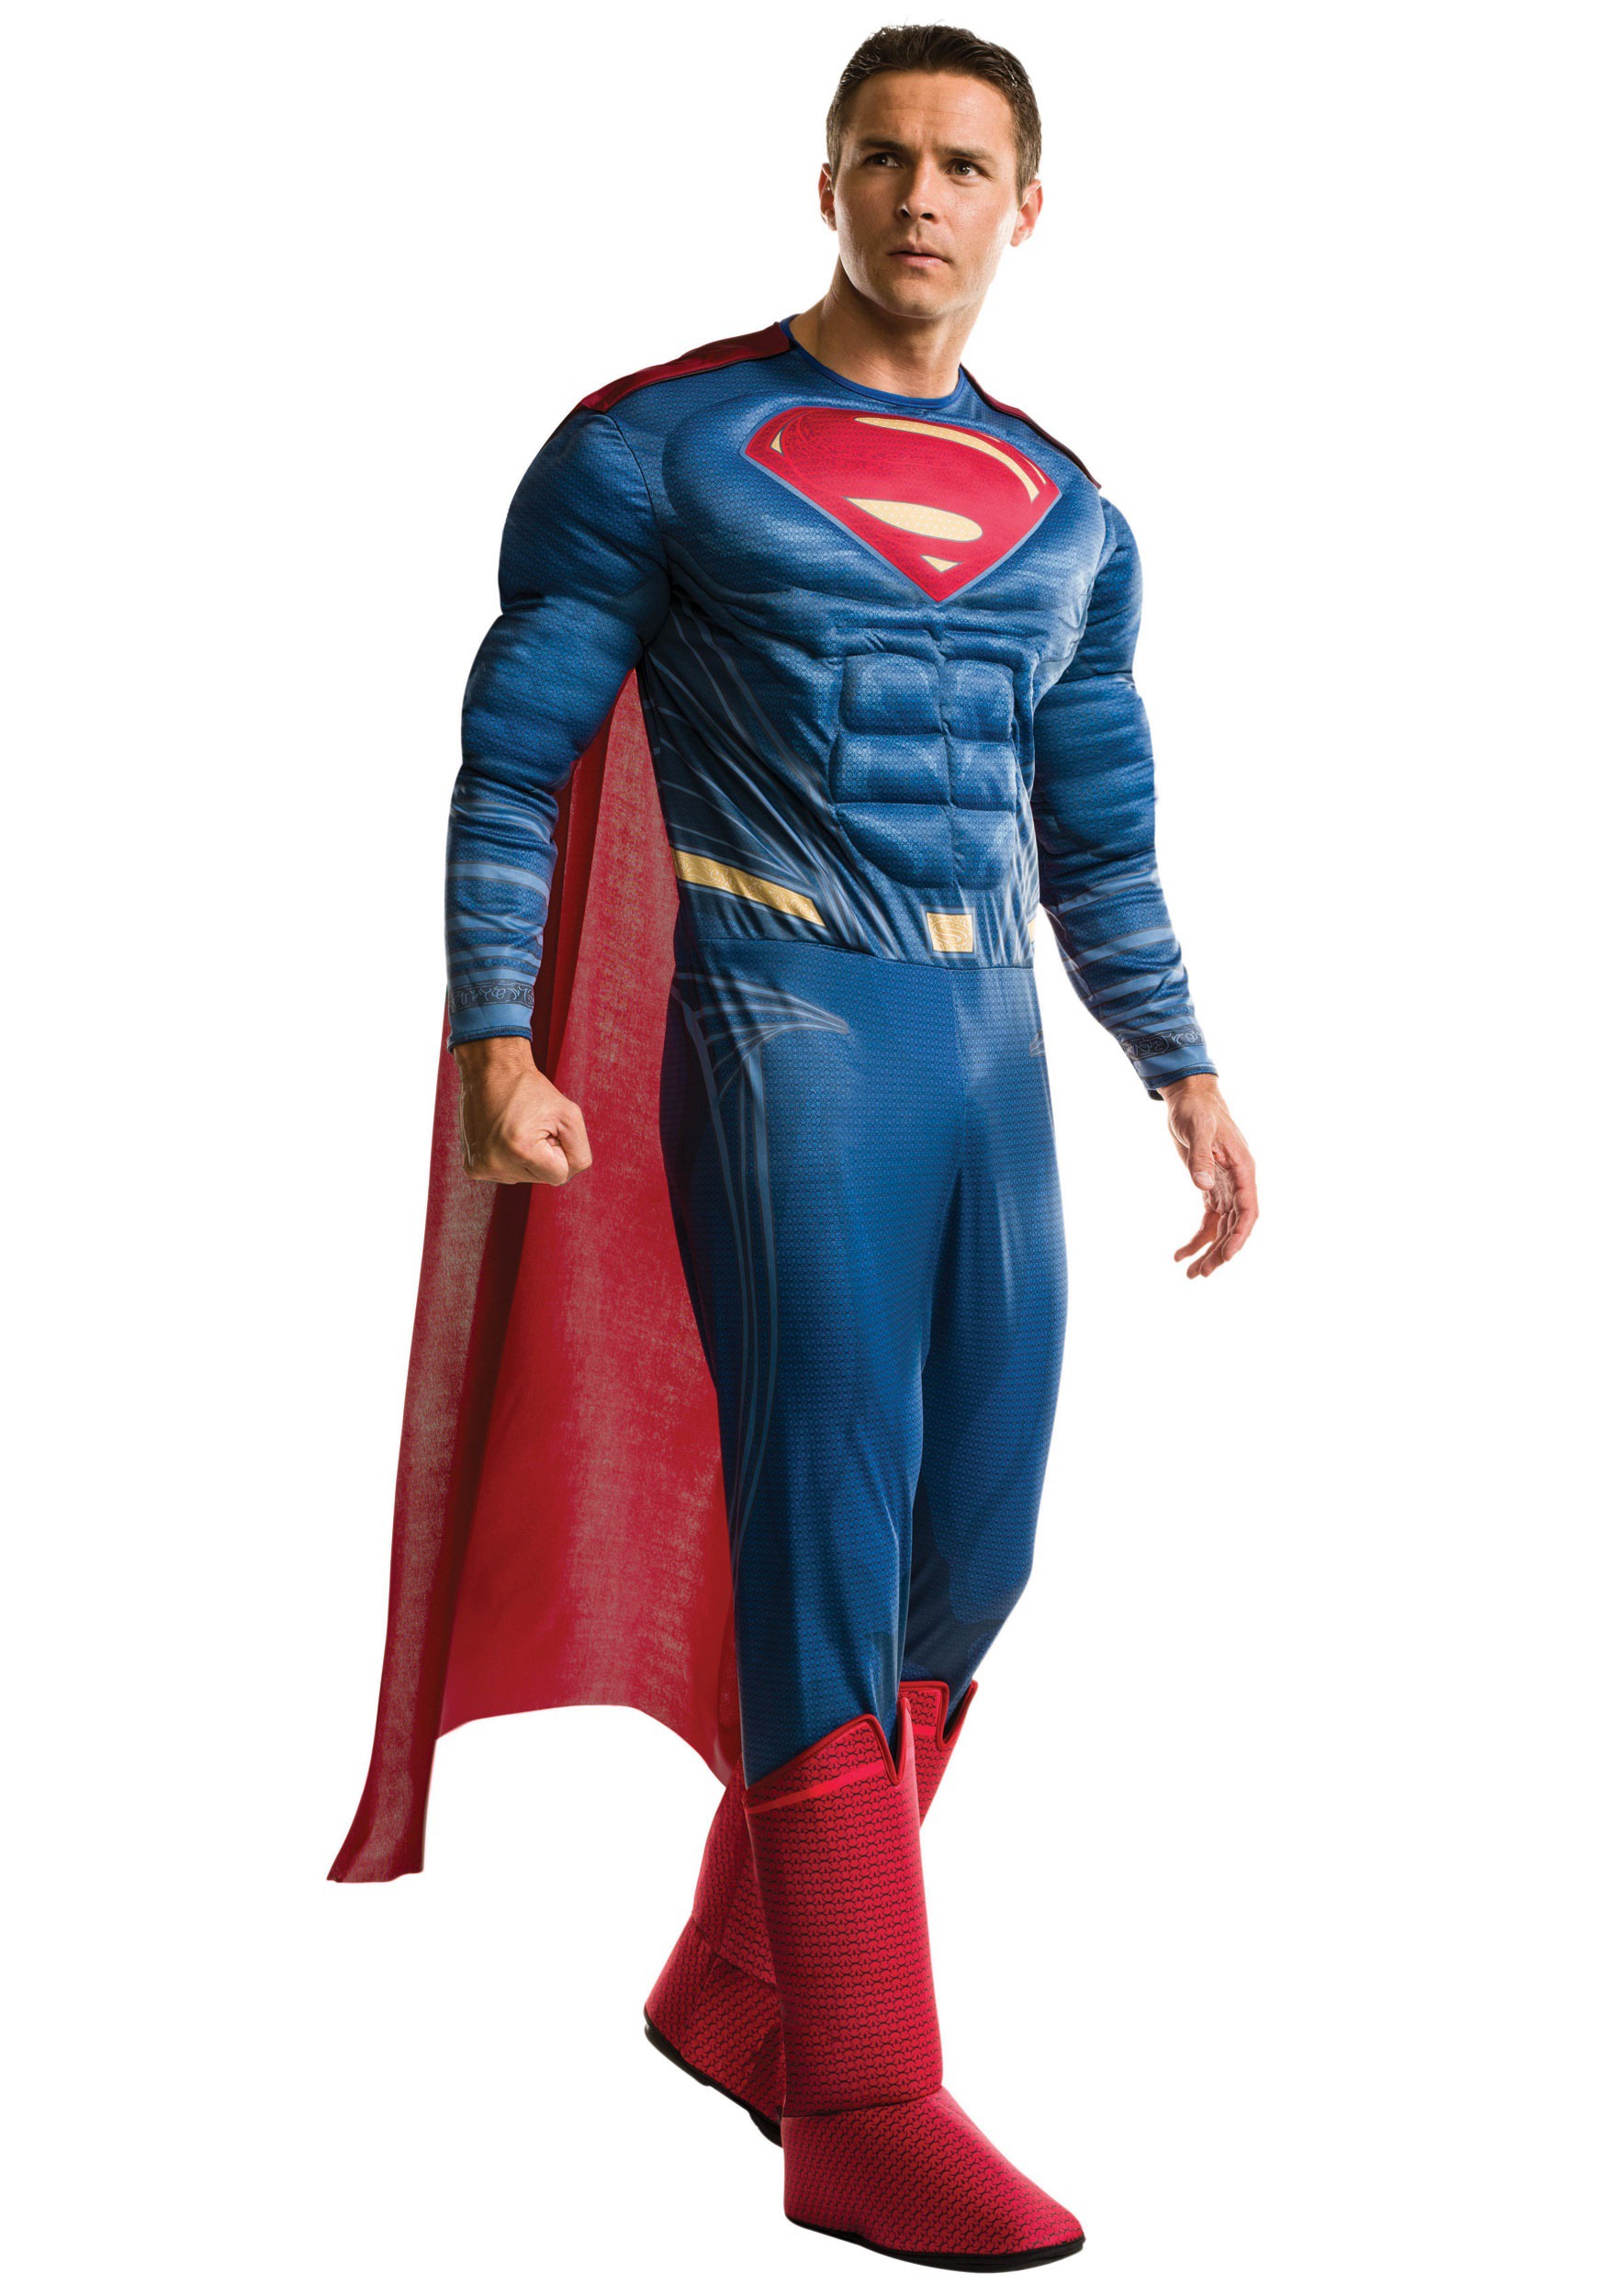 Image of Justice League Adult Deluxe Superman Costume ID RU820692-XL